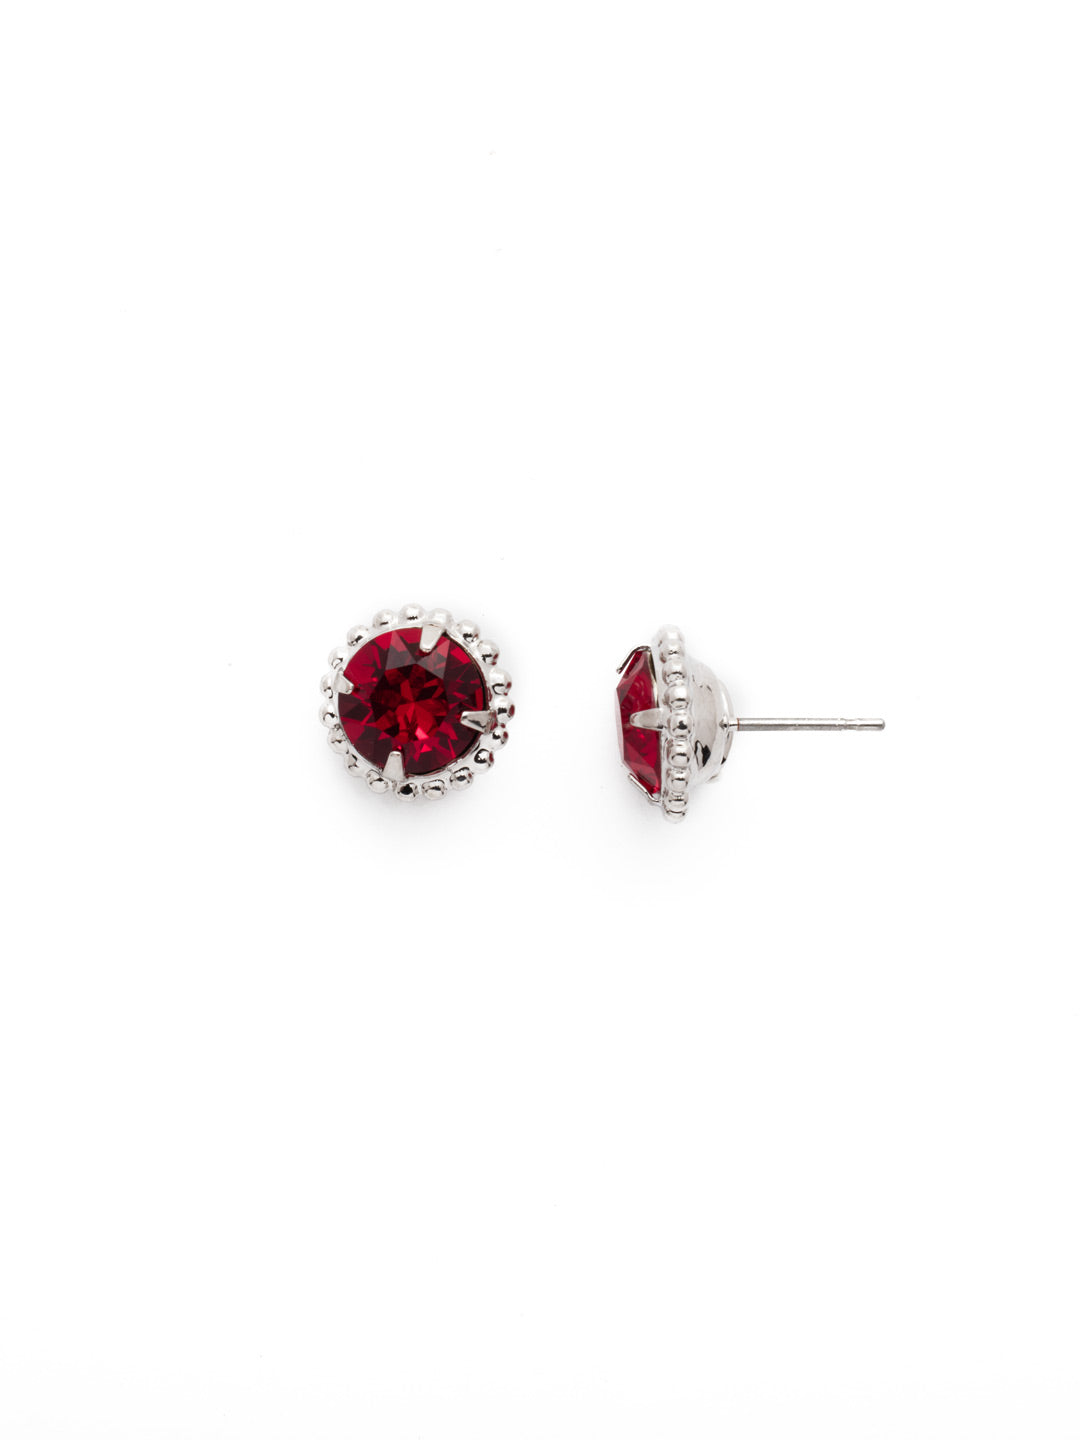 Simplicity Stud Earrings - EBY38RHSI - <p>A timeless classic, the Simplicity Stud Earrings feature round cut crystals in a variety of colors; accented with a halo of metal beaded detail. Need help picking a stud? <a href="https://www.sorrelli.com/blogs/sisterhood/round-stud-earrings-101-a-rundown-of-sizes-styles-and-sparkle">Check out our size guide!</a> From Sorrelli's Siam collection in our Palladium Silver-tone finish.</p>